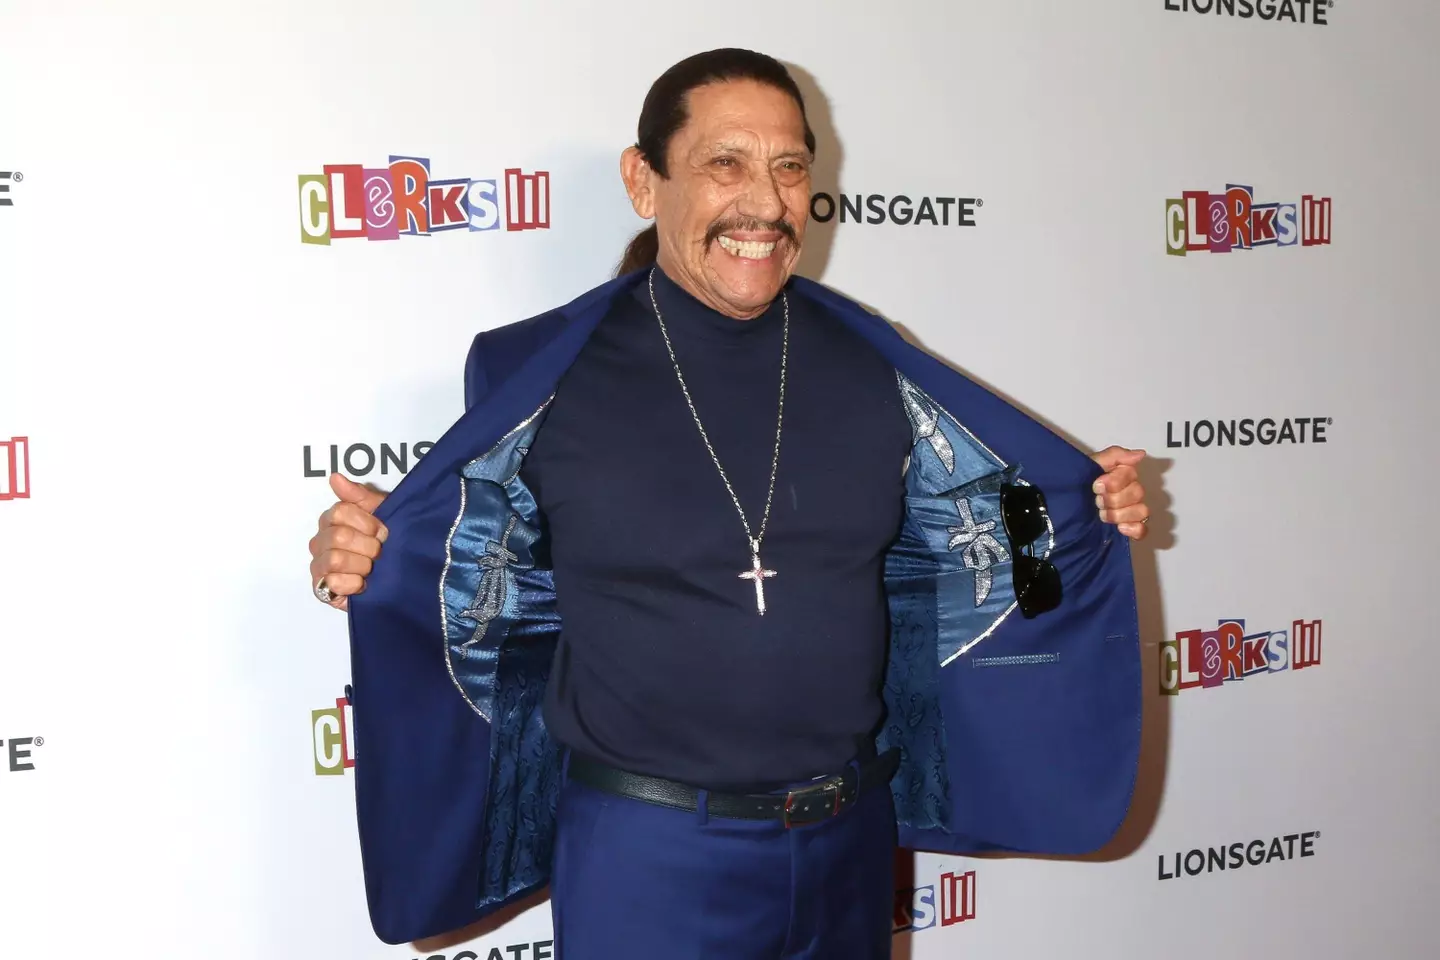 Danny Trejo was asked if he suffers from imposter syndrome.